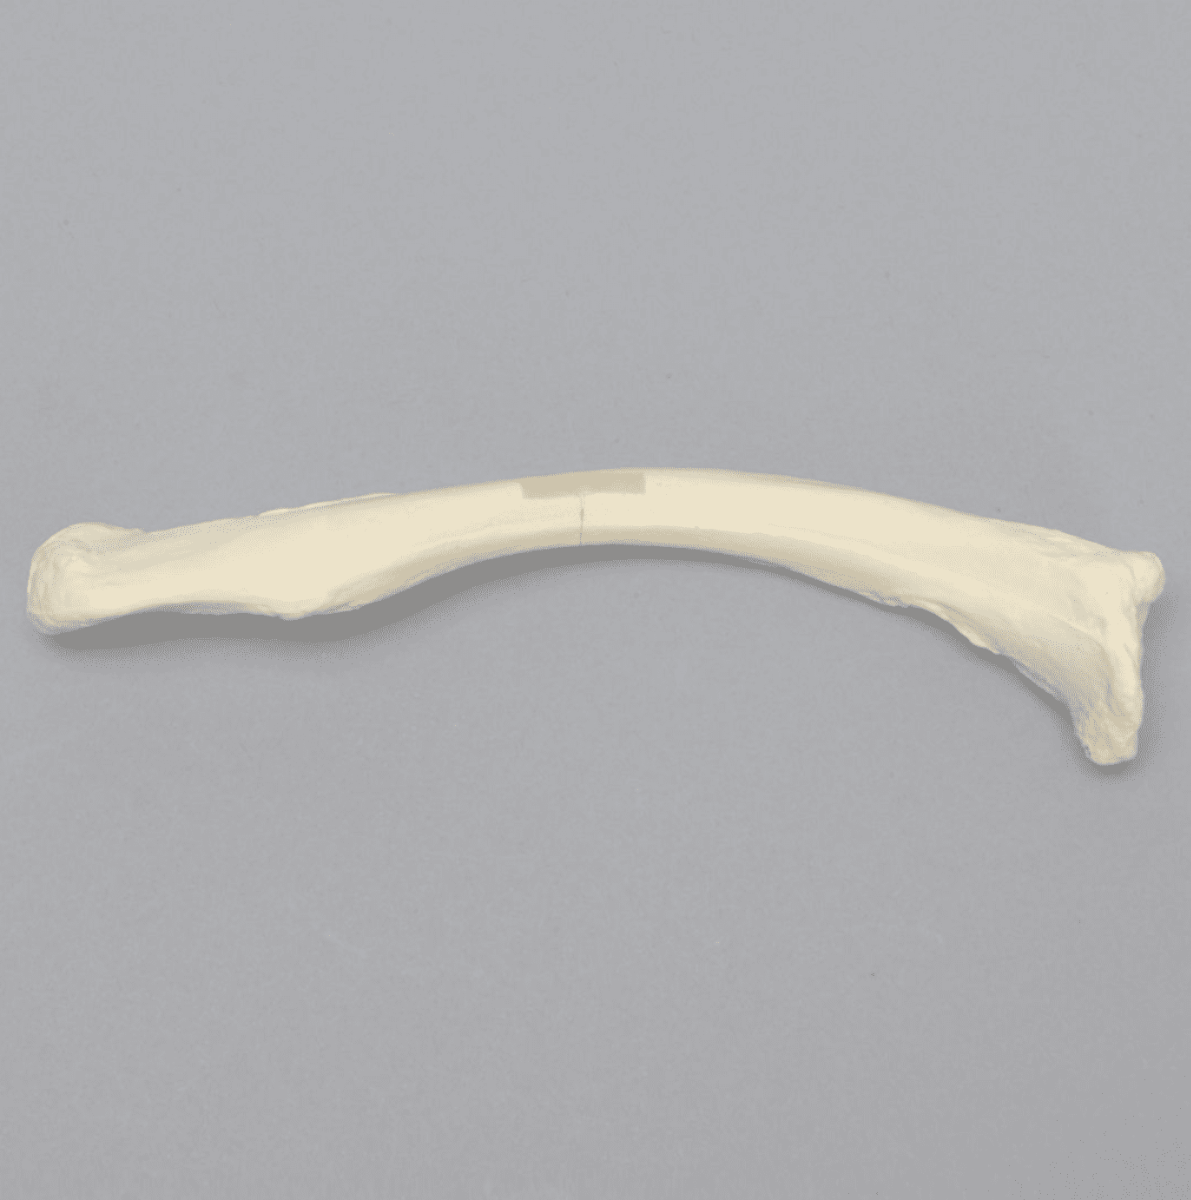 Clavicle with Transverse Fracture, Solid Foam